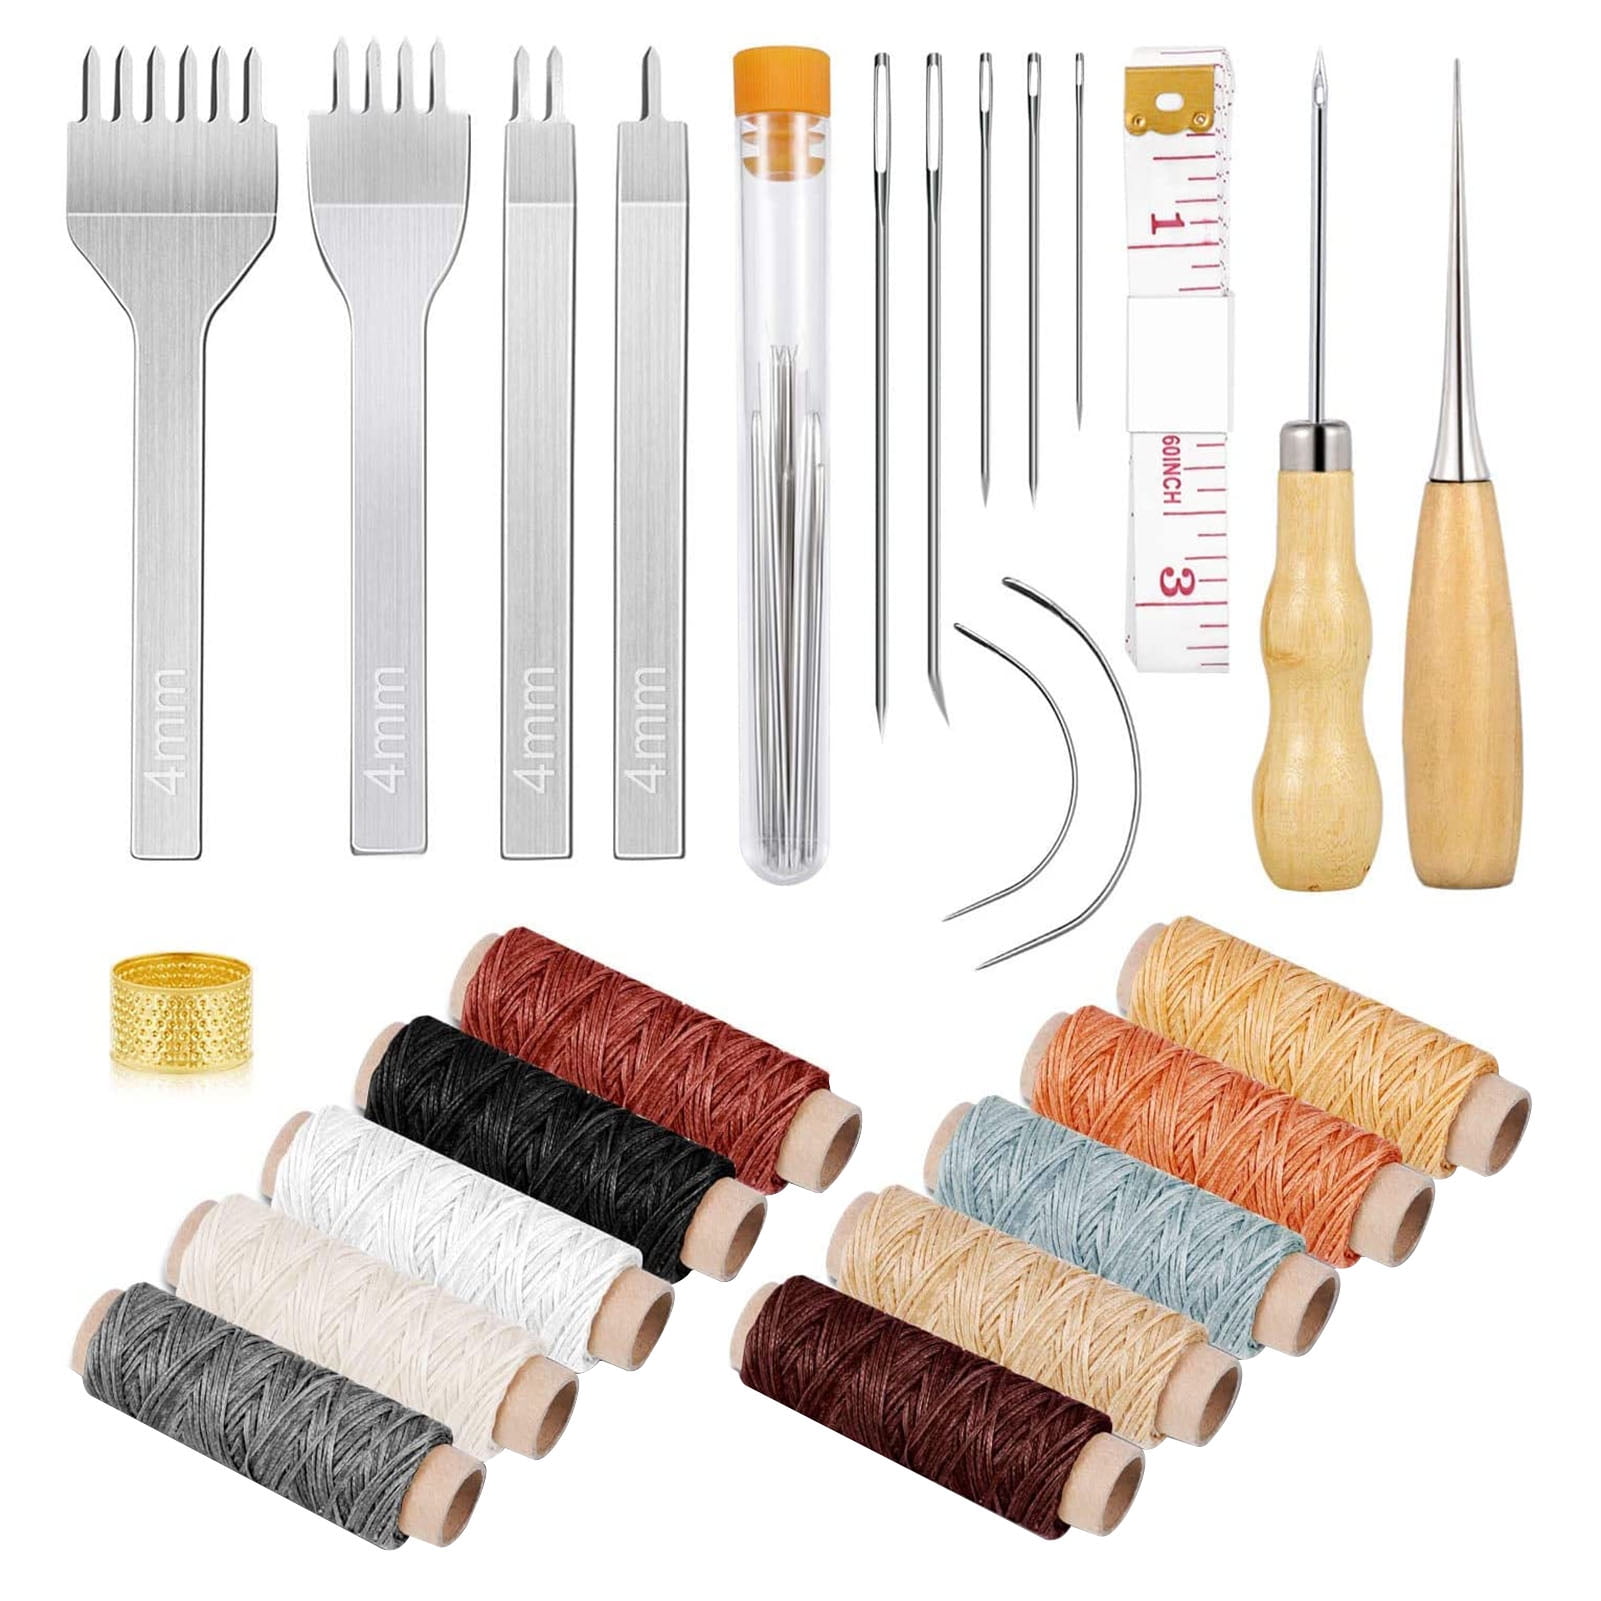 35pcs Leather Sewing Tools Kit with 4mm Stitching Prong Punch Waxed Thread Large-Eye; for Beginners